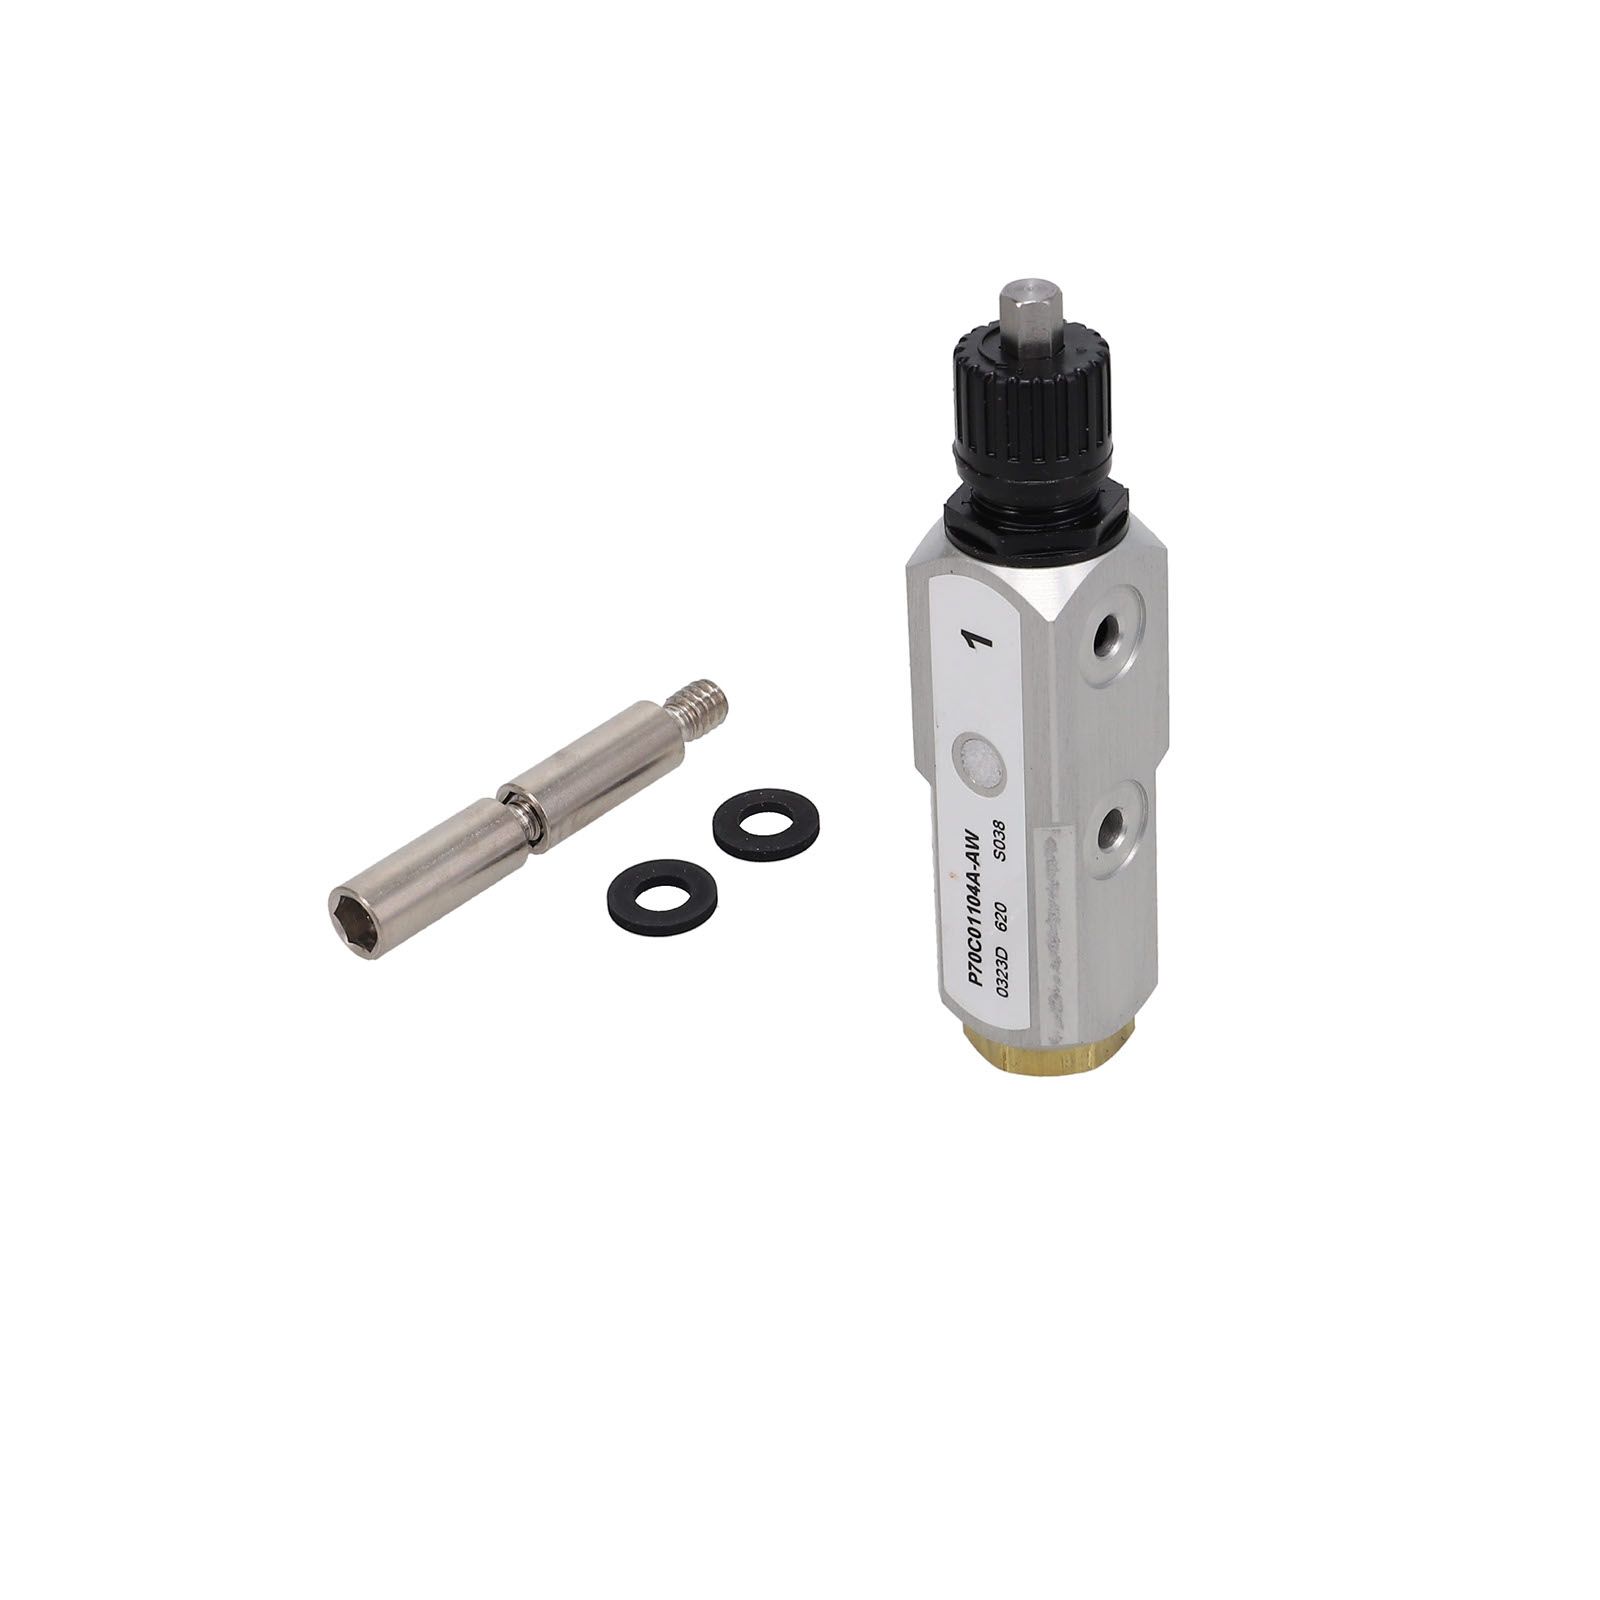 OIL INJECTOR product photo